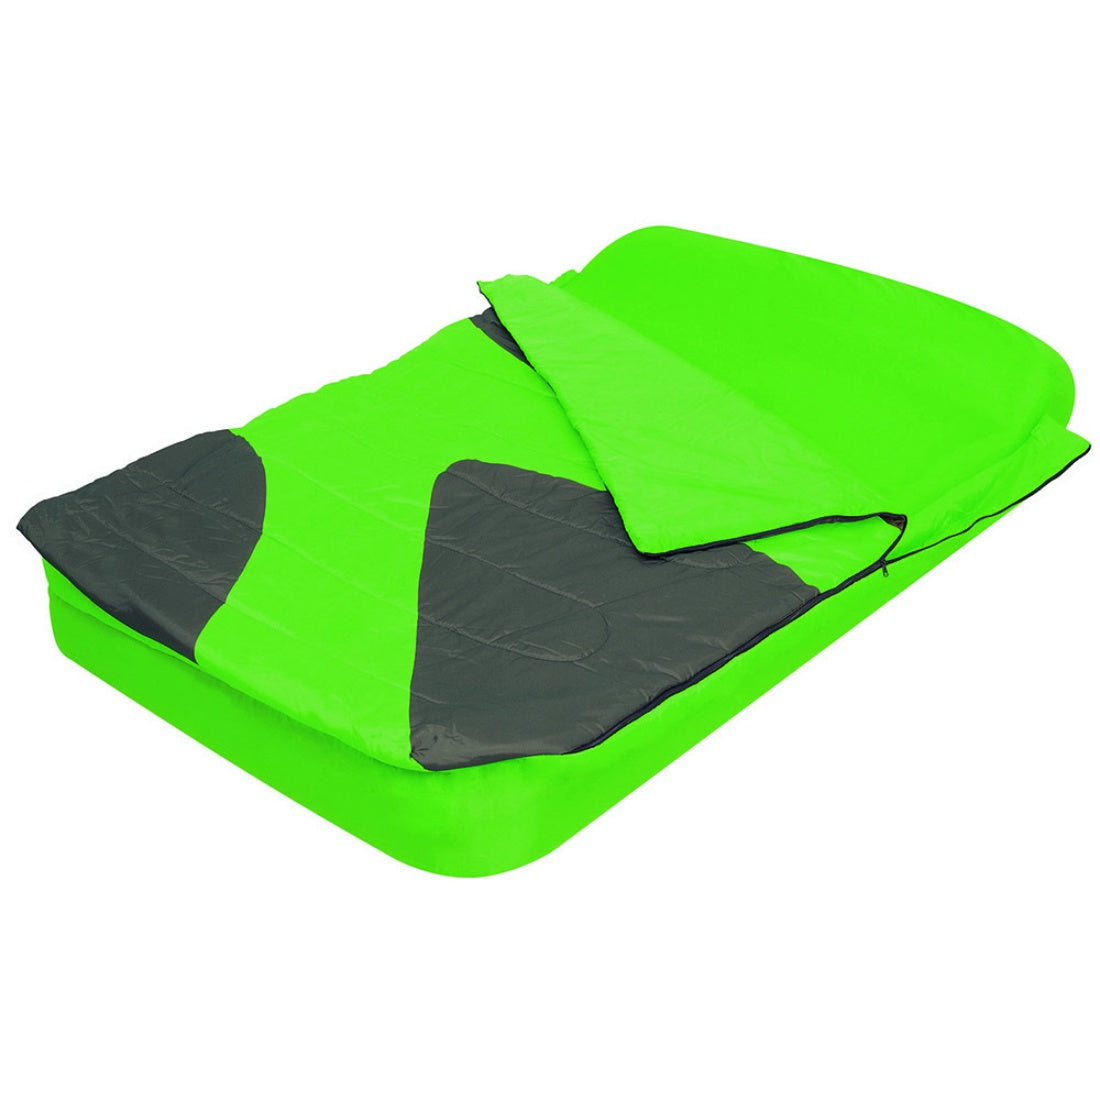 NEW BestWay 2 in 1 Double Air Bed Inflatable Mattress Green Camping Sleeping Bag